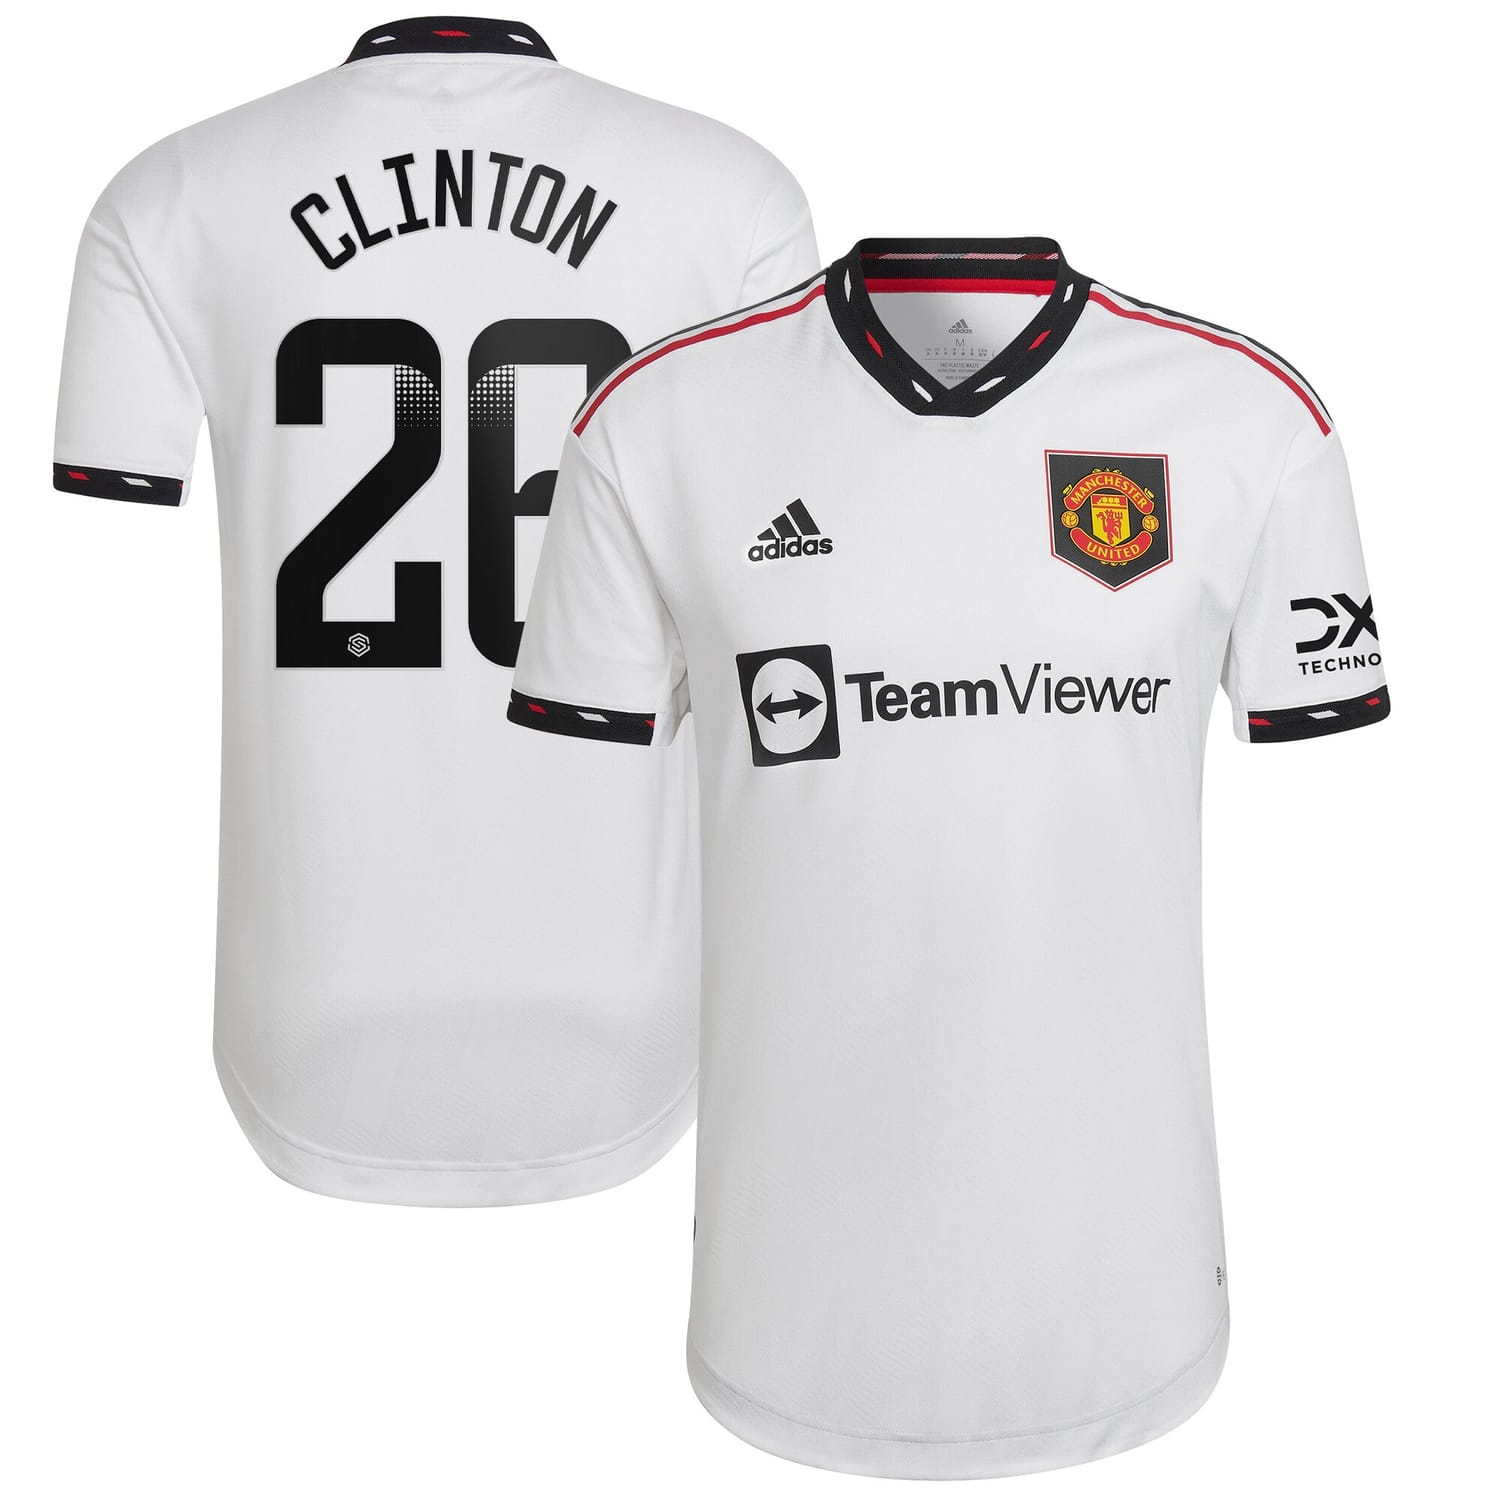 Premier League Manchester United Away WSL Authentic Jersey Shirt 2022-23 player Grace Clinton 26 printing for Men